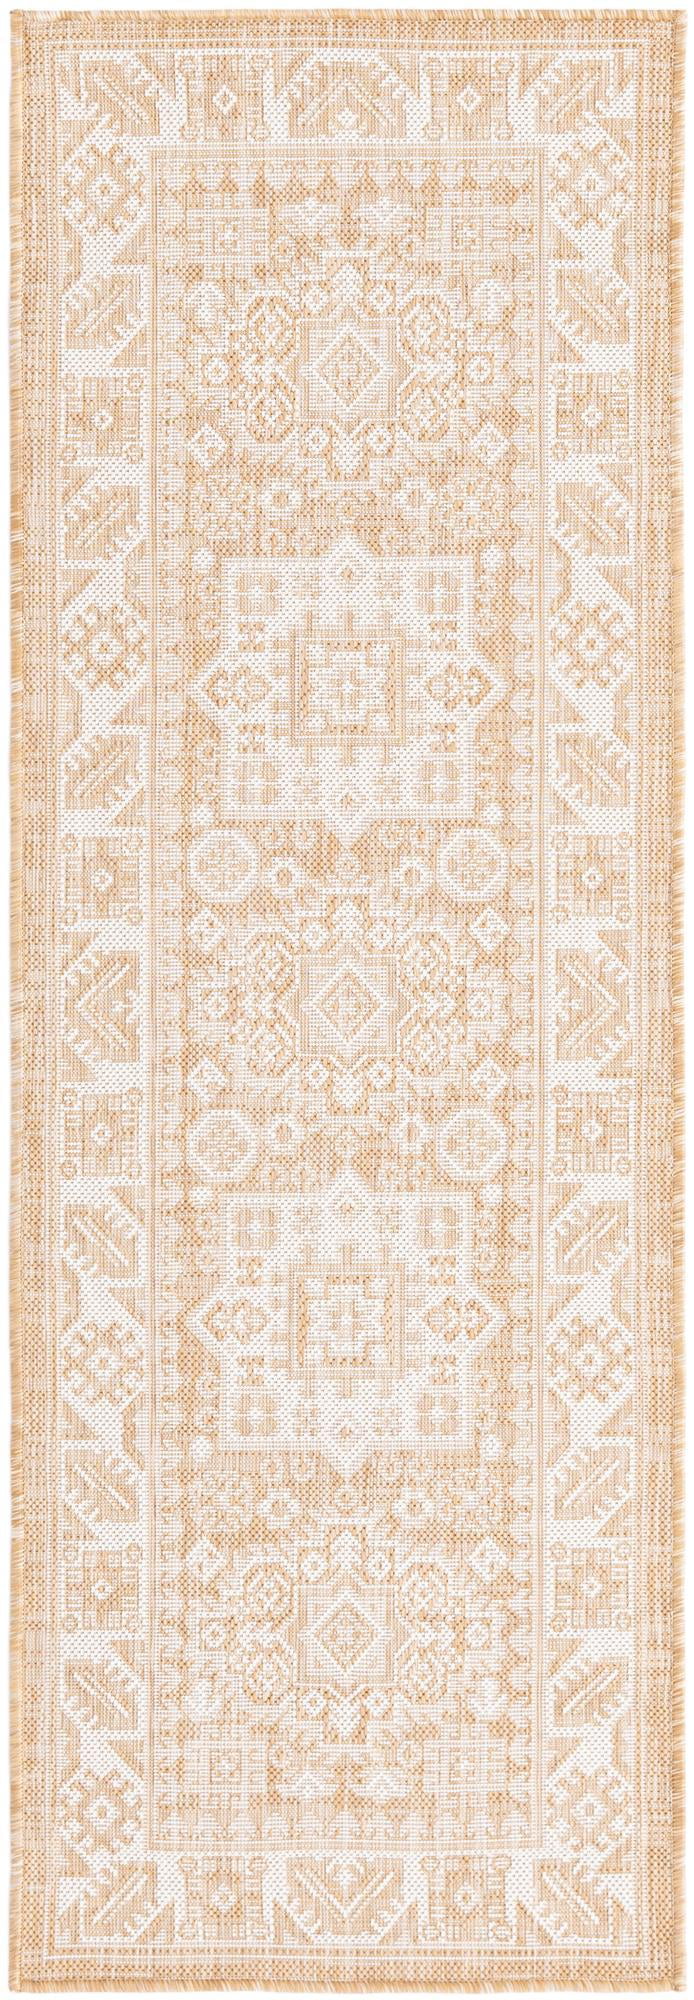 Rugs.com Outdoor Aztec Collection Rug 6 Ft Runner Green Flatweave Rug Perfect for Hallways Entryways